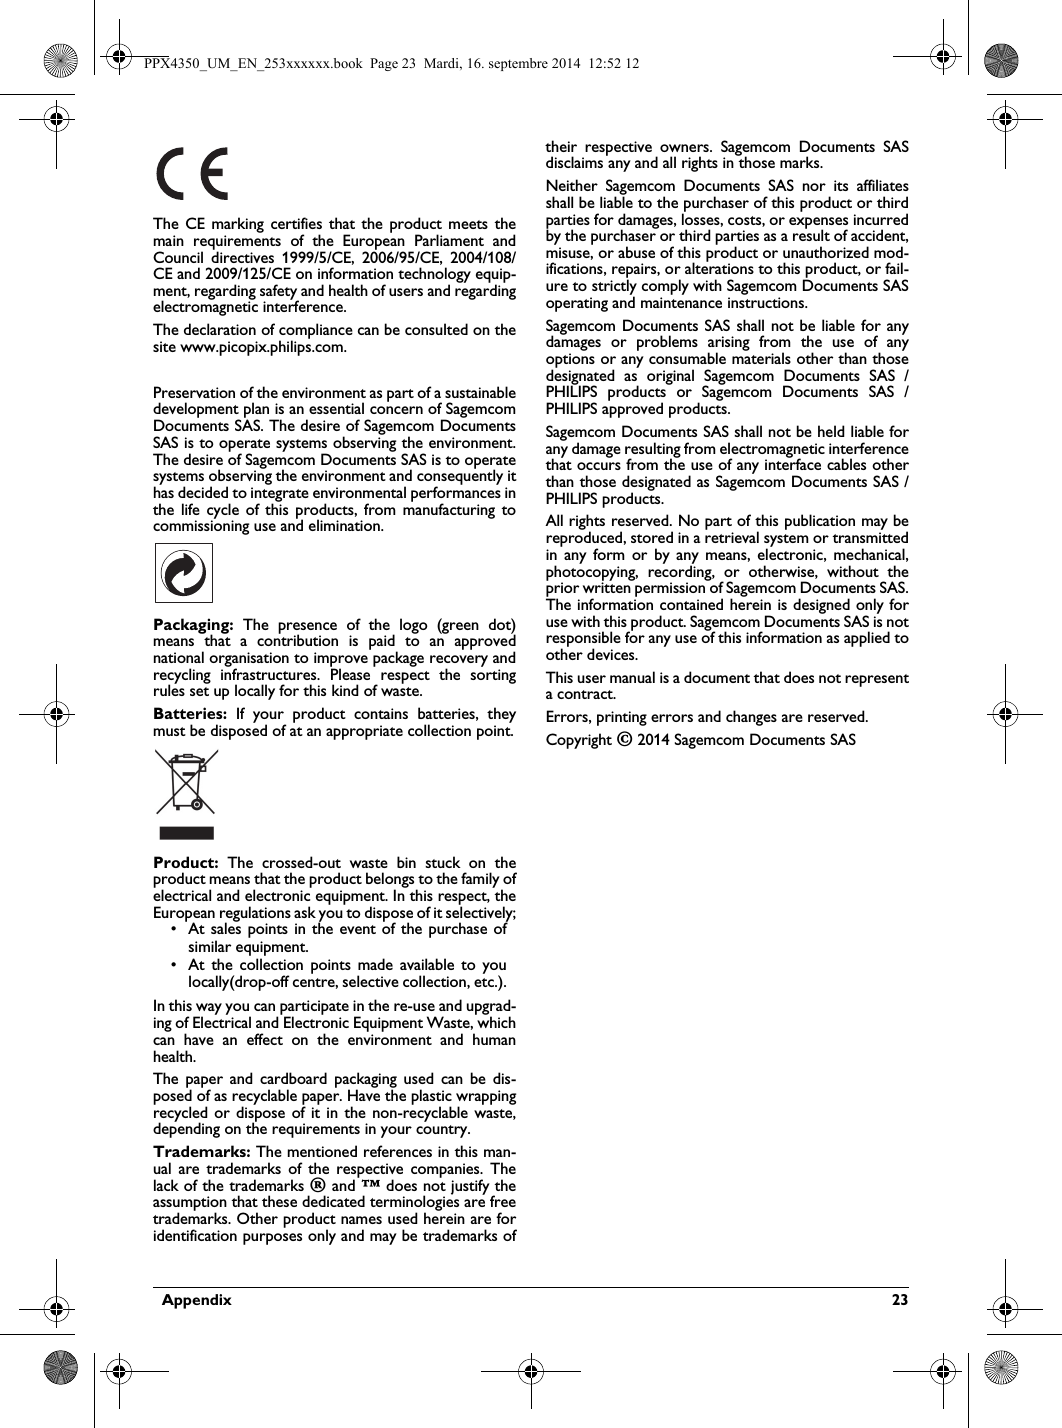   Appendix  23The CE marking certifies that the product meets the main requirements of the European Parliament and Council directives 1999/5/CE, 2006/95/CE, 2004/108/CE and 2009/125/CE on information technology equip-ment, regarding safety and health of users and regarding electromagnetic interference.The declaration of compliance can be consulted on the site www.picopix.philips.com.Preservation of the environment as part of a sustainable development plan is an essential concern of Sagemcom Documents SAS. The desire of Sagemcom Documents SAS is to operate systems observing the environment. The desire of Sagemcom Documents SAS is to operate systems observing the environment and consequently it has decided to integrate environmental performances in the life cycle of this products, from manufacturing to commissioning use and elimination.Packaging: The presence of the logo (green dot) means that a contribution is paid to an approved national organisation to improve package recovery and recycling infrastructures. Please respect the sorting rules set up locally for this kind of waste.Batteries: If your product contains batteries, they must be disposed of at an appropriate collection point.Product: The crossed-out waste bin stuck on the product means that the product belongs to the family of electrical and electronic equipment. In this respect, the European regulations ask you to dispose of it selectively;• At sales points in the event of the purchase of similar equipment.• At the collection points made available to you locally(drop-off centre, selective collection, etc.).In this way you can participate in the re-use and upgrad-ing of Electrical and Electronic Equipment Waste, which can have an effect on the environment and human health.The paper and cardboard packaging used can be dis-posed of as recyclable paper. Have the plastic wrapping recycled or dispose of it in the non-recyclable waste, depending on the requirements in your country.Trademarks: The mentioned references in this man-ual are trademarks of the respective companies. The lack of the trademarks É and Ë does not justify the assumption that these dedicated terminologies are free trademarks. Other product names used herein are for identification purposes only and may be trademarks of their respective owners. Sagemcom Documents SAS disclaims any and all rights in those marks.Neither Sagemcom Documents SAS nor its affiliates shall be liable to the purchaser of this product or third parties for damages, losses, costs, or expenses incurred by the purchaser or third parties as a result of accident, misuse, or abuse of this product or unauthorized mod-ifications, repairs, or alterations to this product, or fail-ure to strictly comply with Sagemcom Documents SAS operating and maintenance instructions.Sagemcom Documents SAS shall not be liable for any damages or problems arising from the use of any options or any consumable materials other than those designated as original Sagemcom Documents SAS / PHILIPS products or Sagemcom Documents SAS / PHILIPS approved products.Sagemcom Documents SAS shall not be held liable for any damage resulting from electromagnetic interference that occurs from the use of any interface cables other than those designated as Sagemcom Documents SAS / PHILIPS products.All rights reserved. No part of this publication may be reproduced, stored in a retrieval system or transmitted in any form or by any means, electronic, mechanical, photocopying, recording, or otherwise, without the prior written permission of Sagemcom Documents SAS. The information contained herein is designed only for use with this product. Sagemcom Documents SAS is not responsible for any use of this information as applied to other devices.This user manual is a document that does not represent a contract.Errors, printing errors and changes are reserved.Copyright È 2014 Sagemcom Documents SASPPX4350_UM_EN_253xxxxxx.book  Page 23  Mardi, 16. septembre 2014  12:52 12